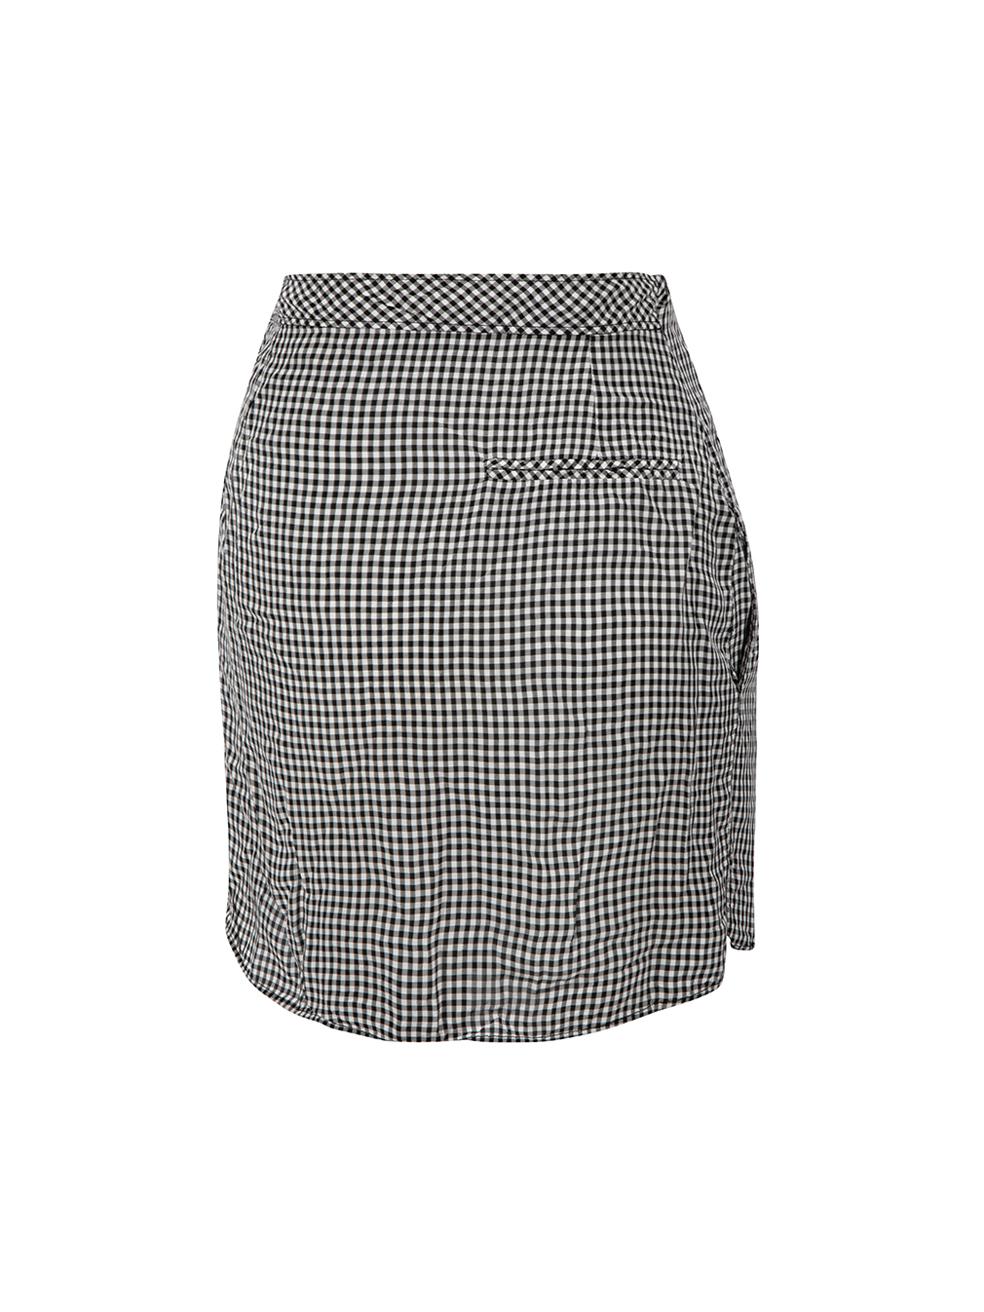 Altuzarra Black Gingham Wrap Mini Skirt Size S In Good Condition For Sale In London, GB